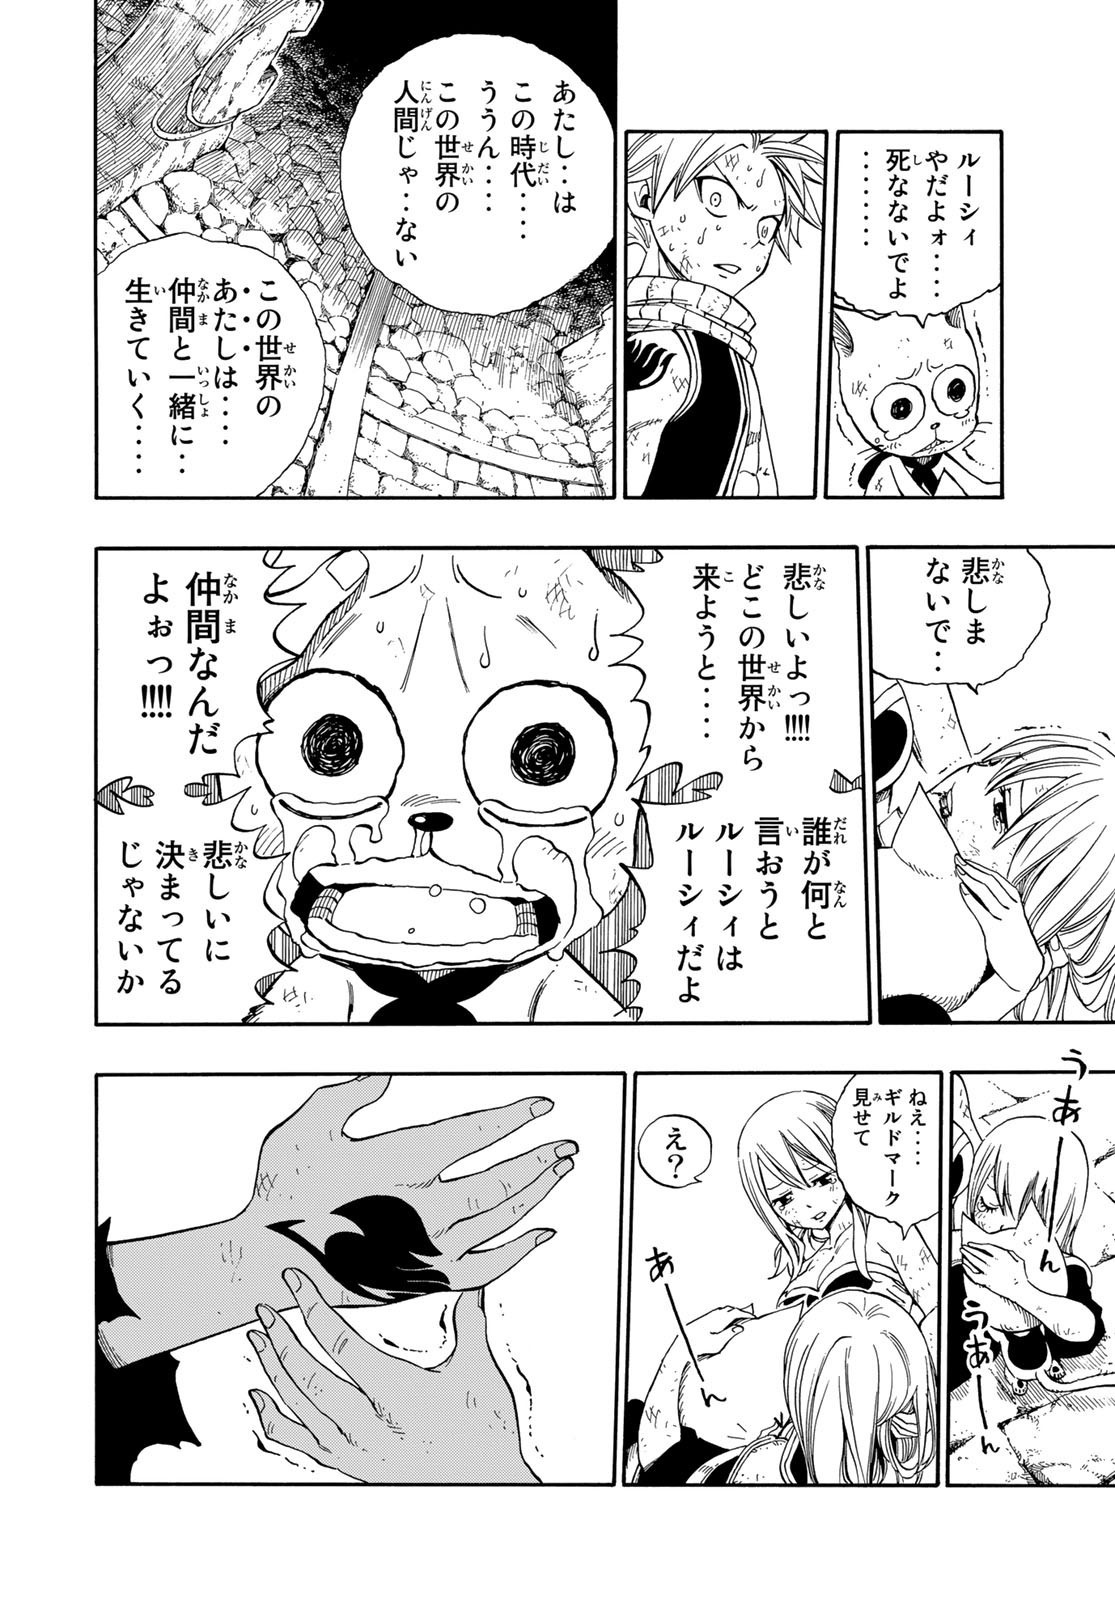 Weekly Shōnen Magazine - 週刊少年マガジン - Chapter 2024-28 - Page 475